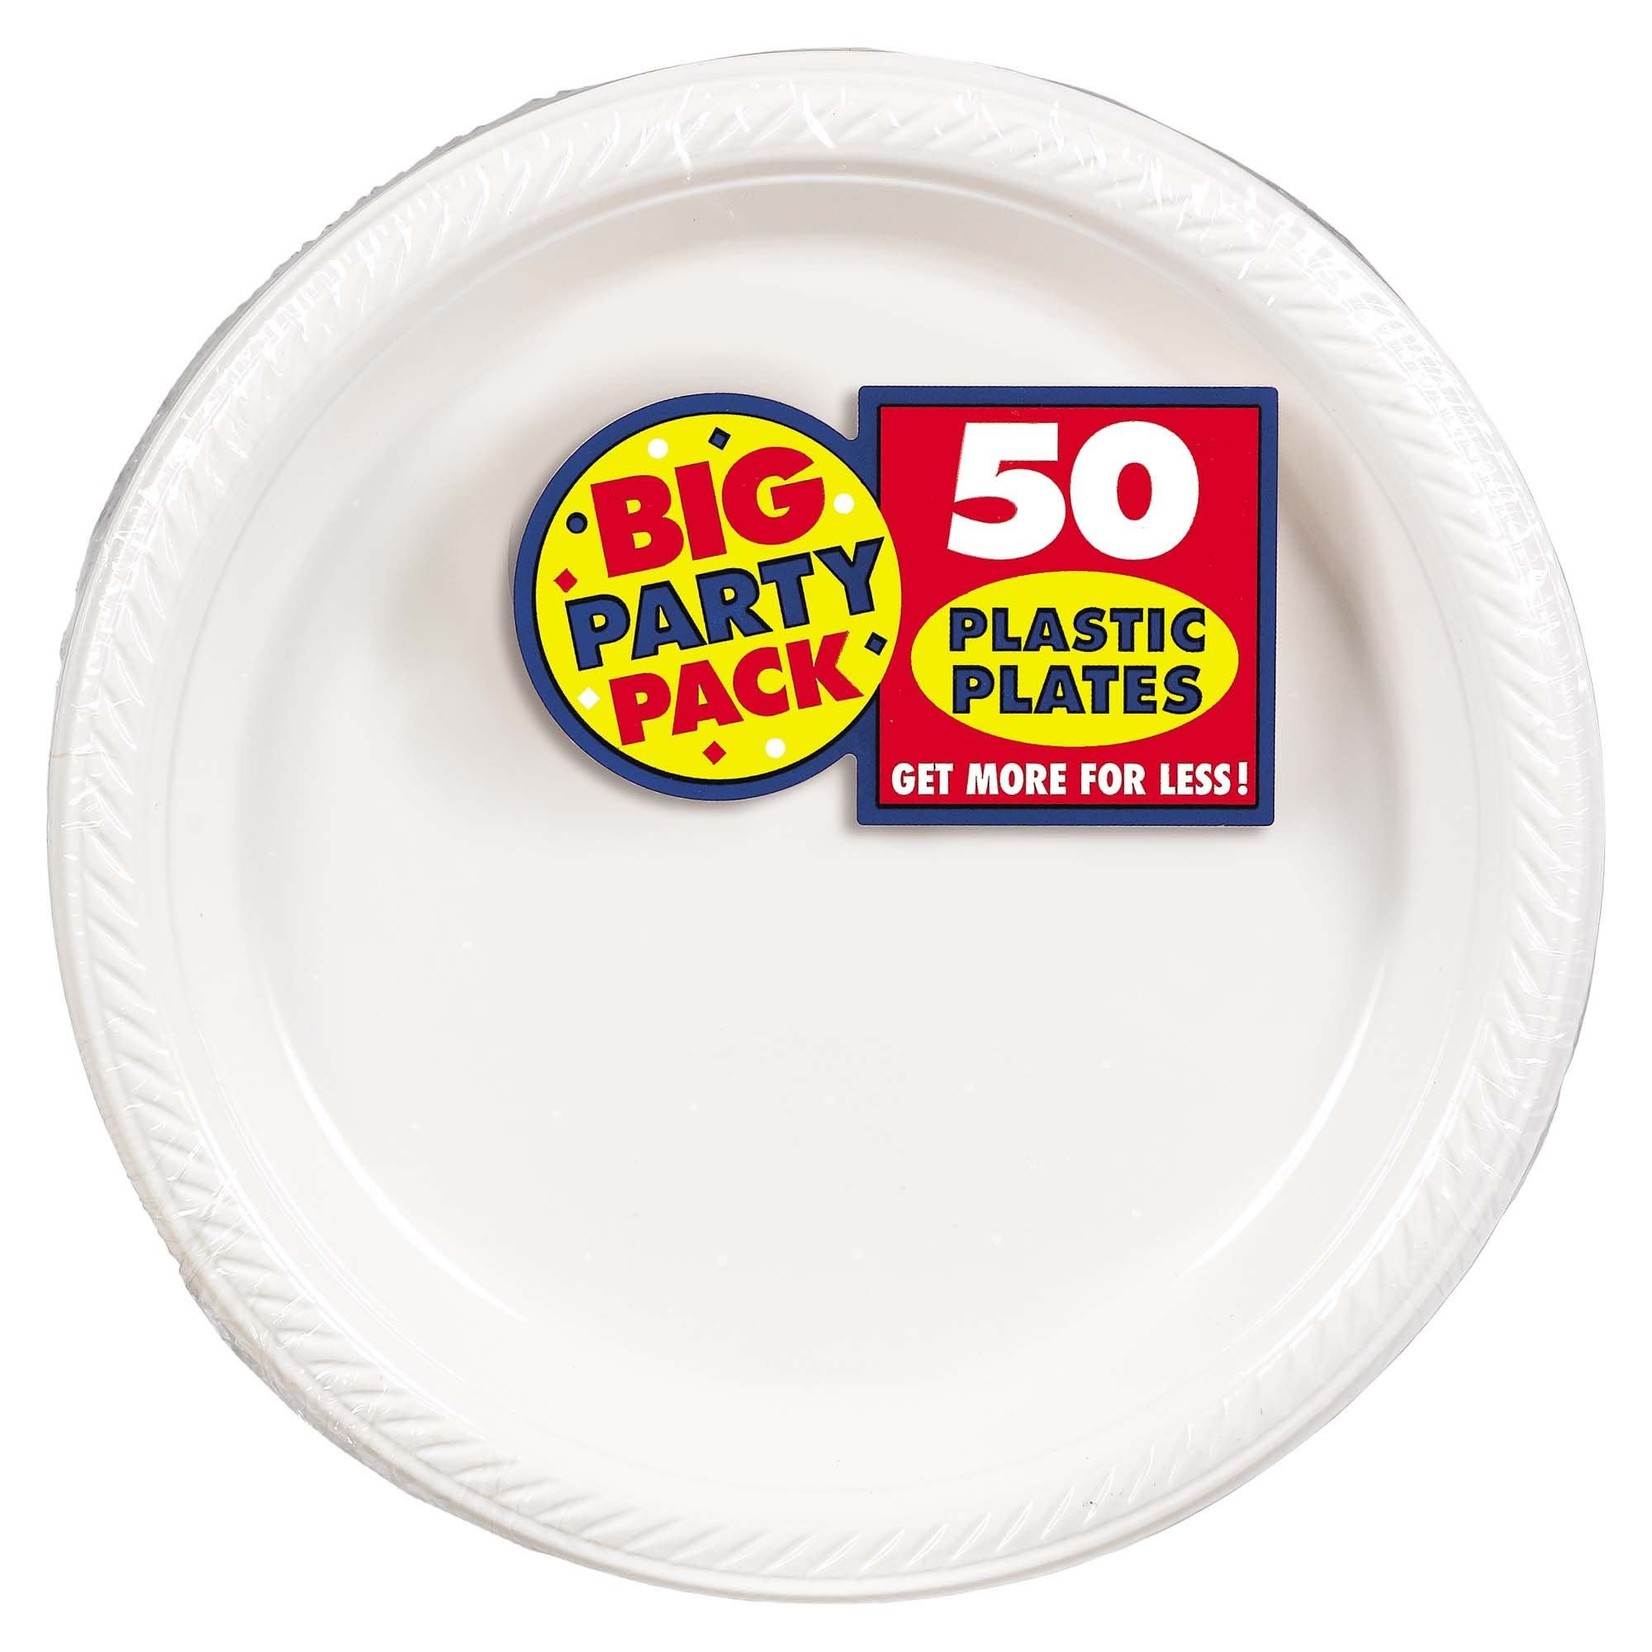 10" Round White Big Party Pack Plates